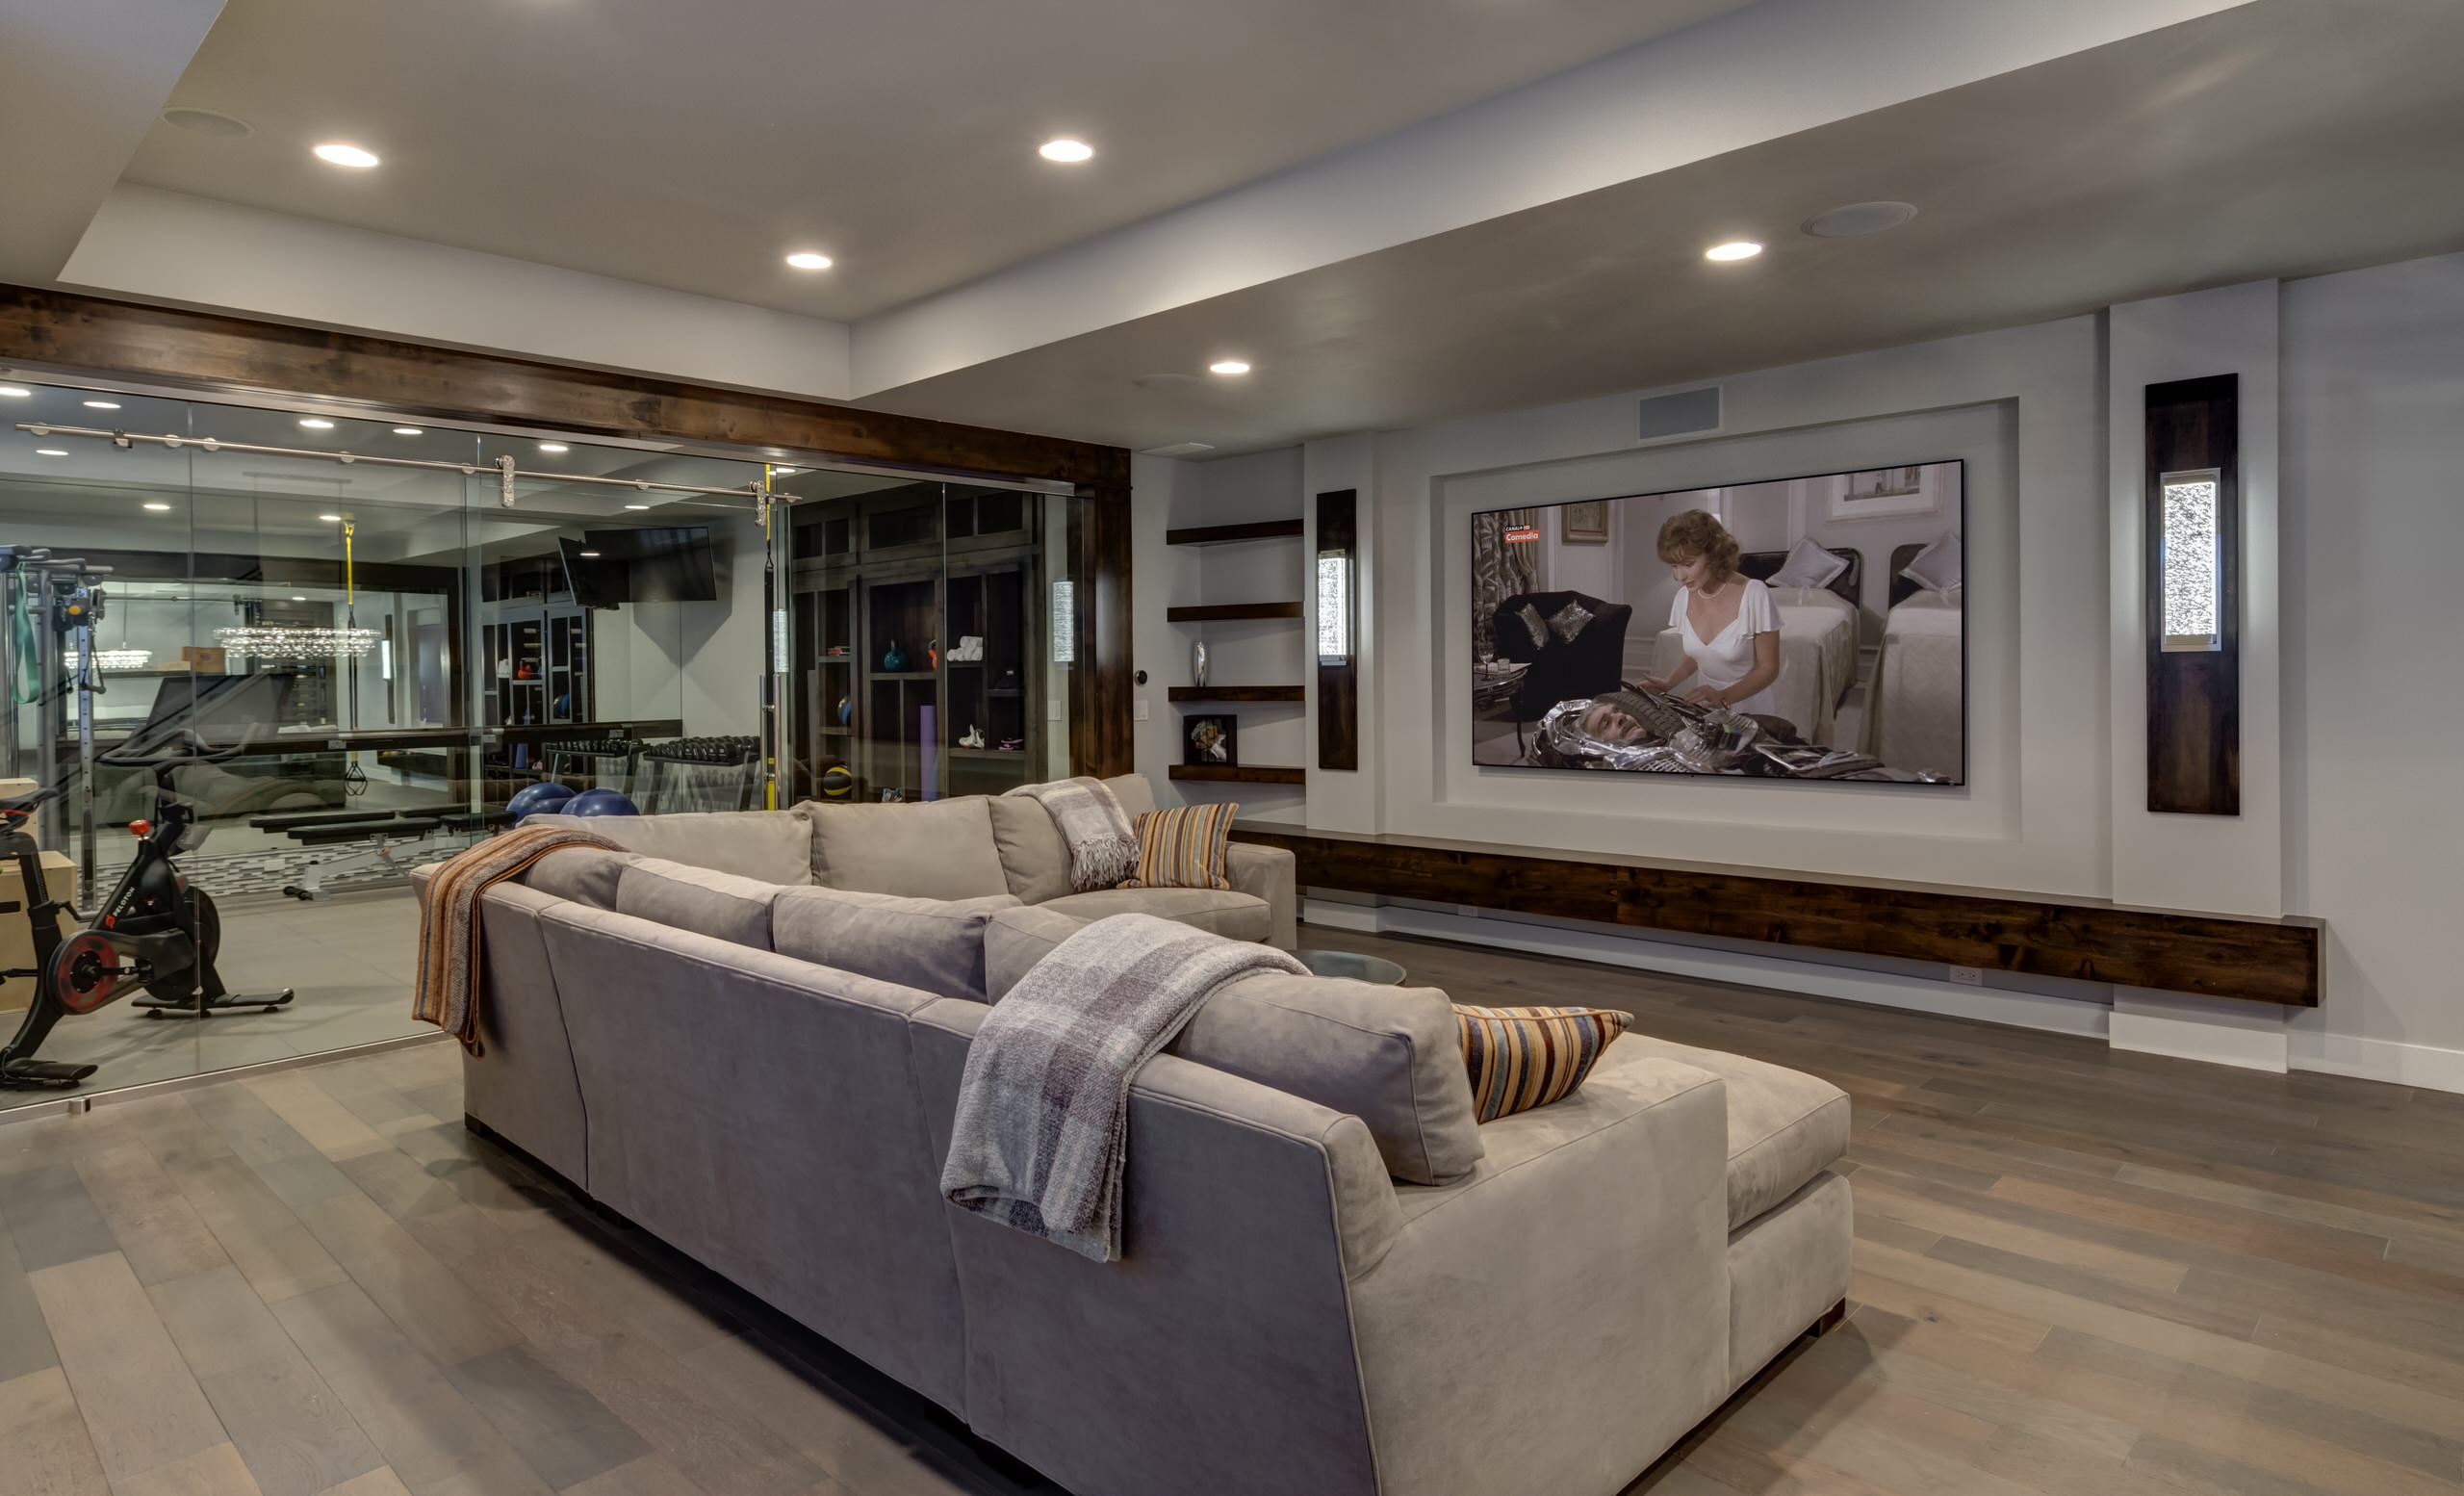 75 Beautiful Basement Pictures Ideas February